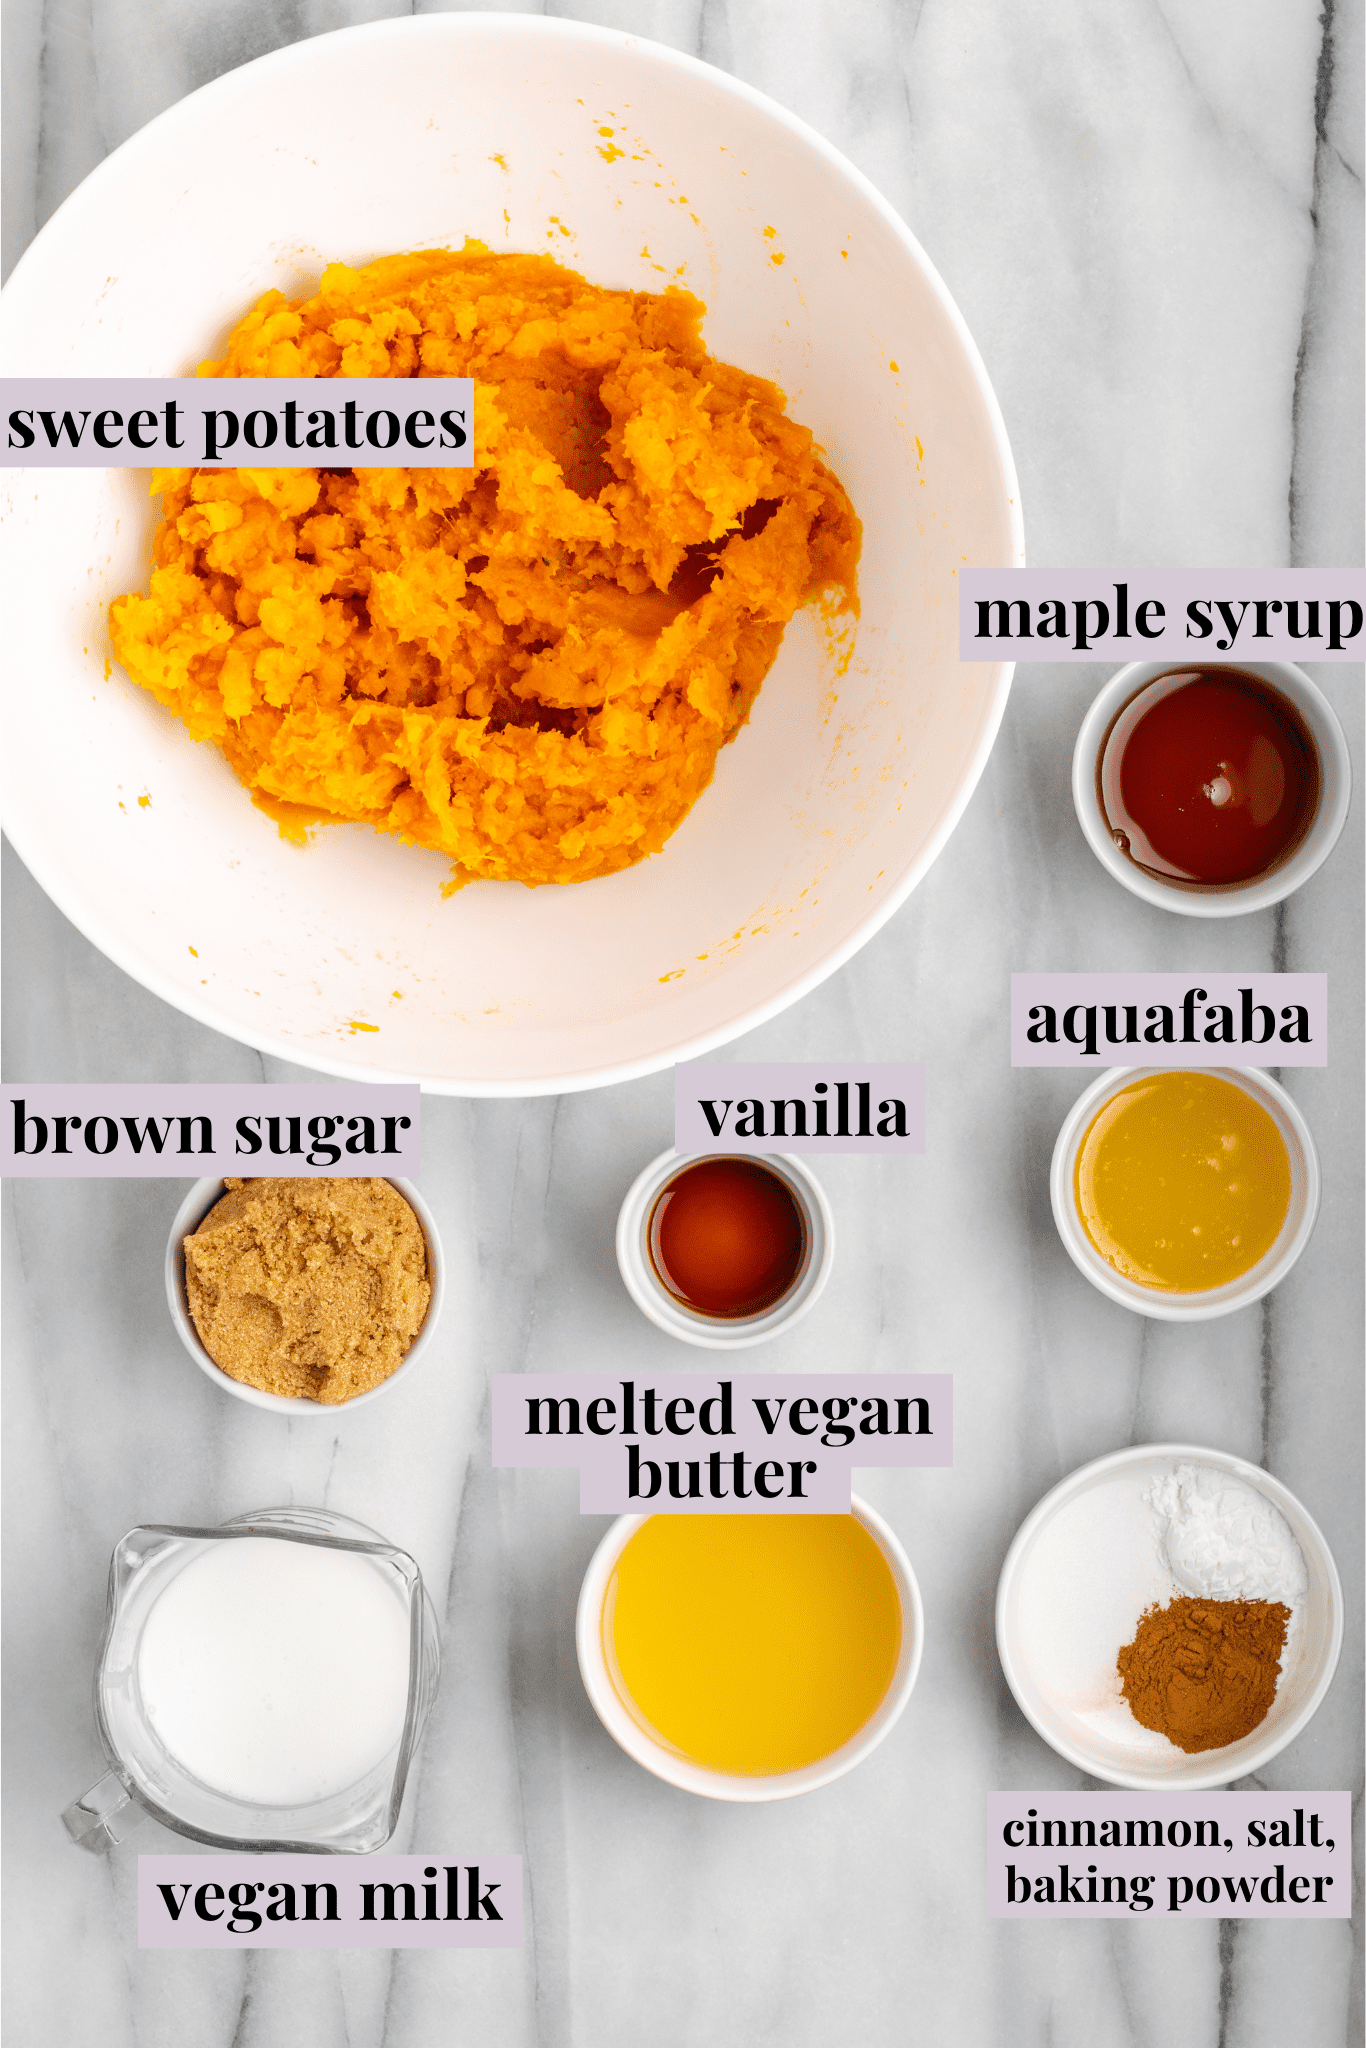 Overhead view of the ingredients for sweet potato soufflé: a bowl of sweet potatoes, a bowl of melted butter, a bowl of non-dairy milk, a bowl of vanilla extract, a bowl of aquafaba, a bowl of brown sugar, and a bowl of salt, cinnamon, and baking powder